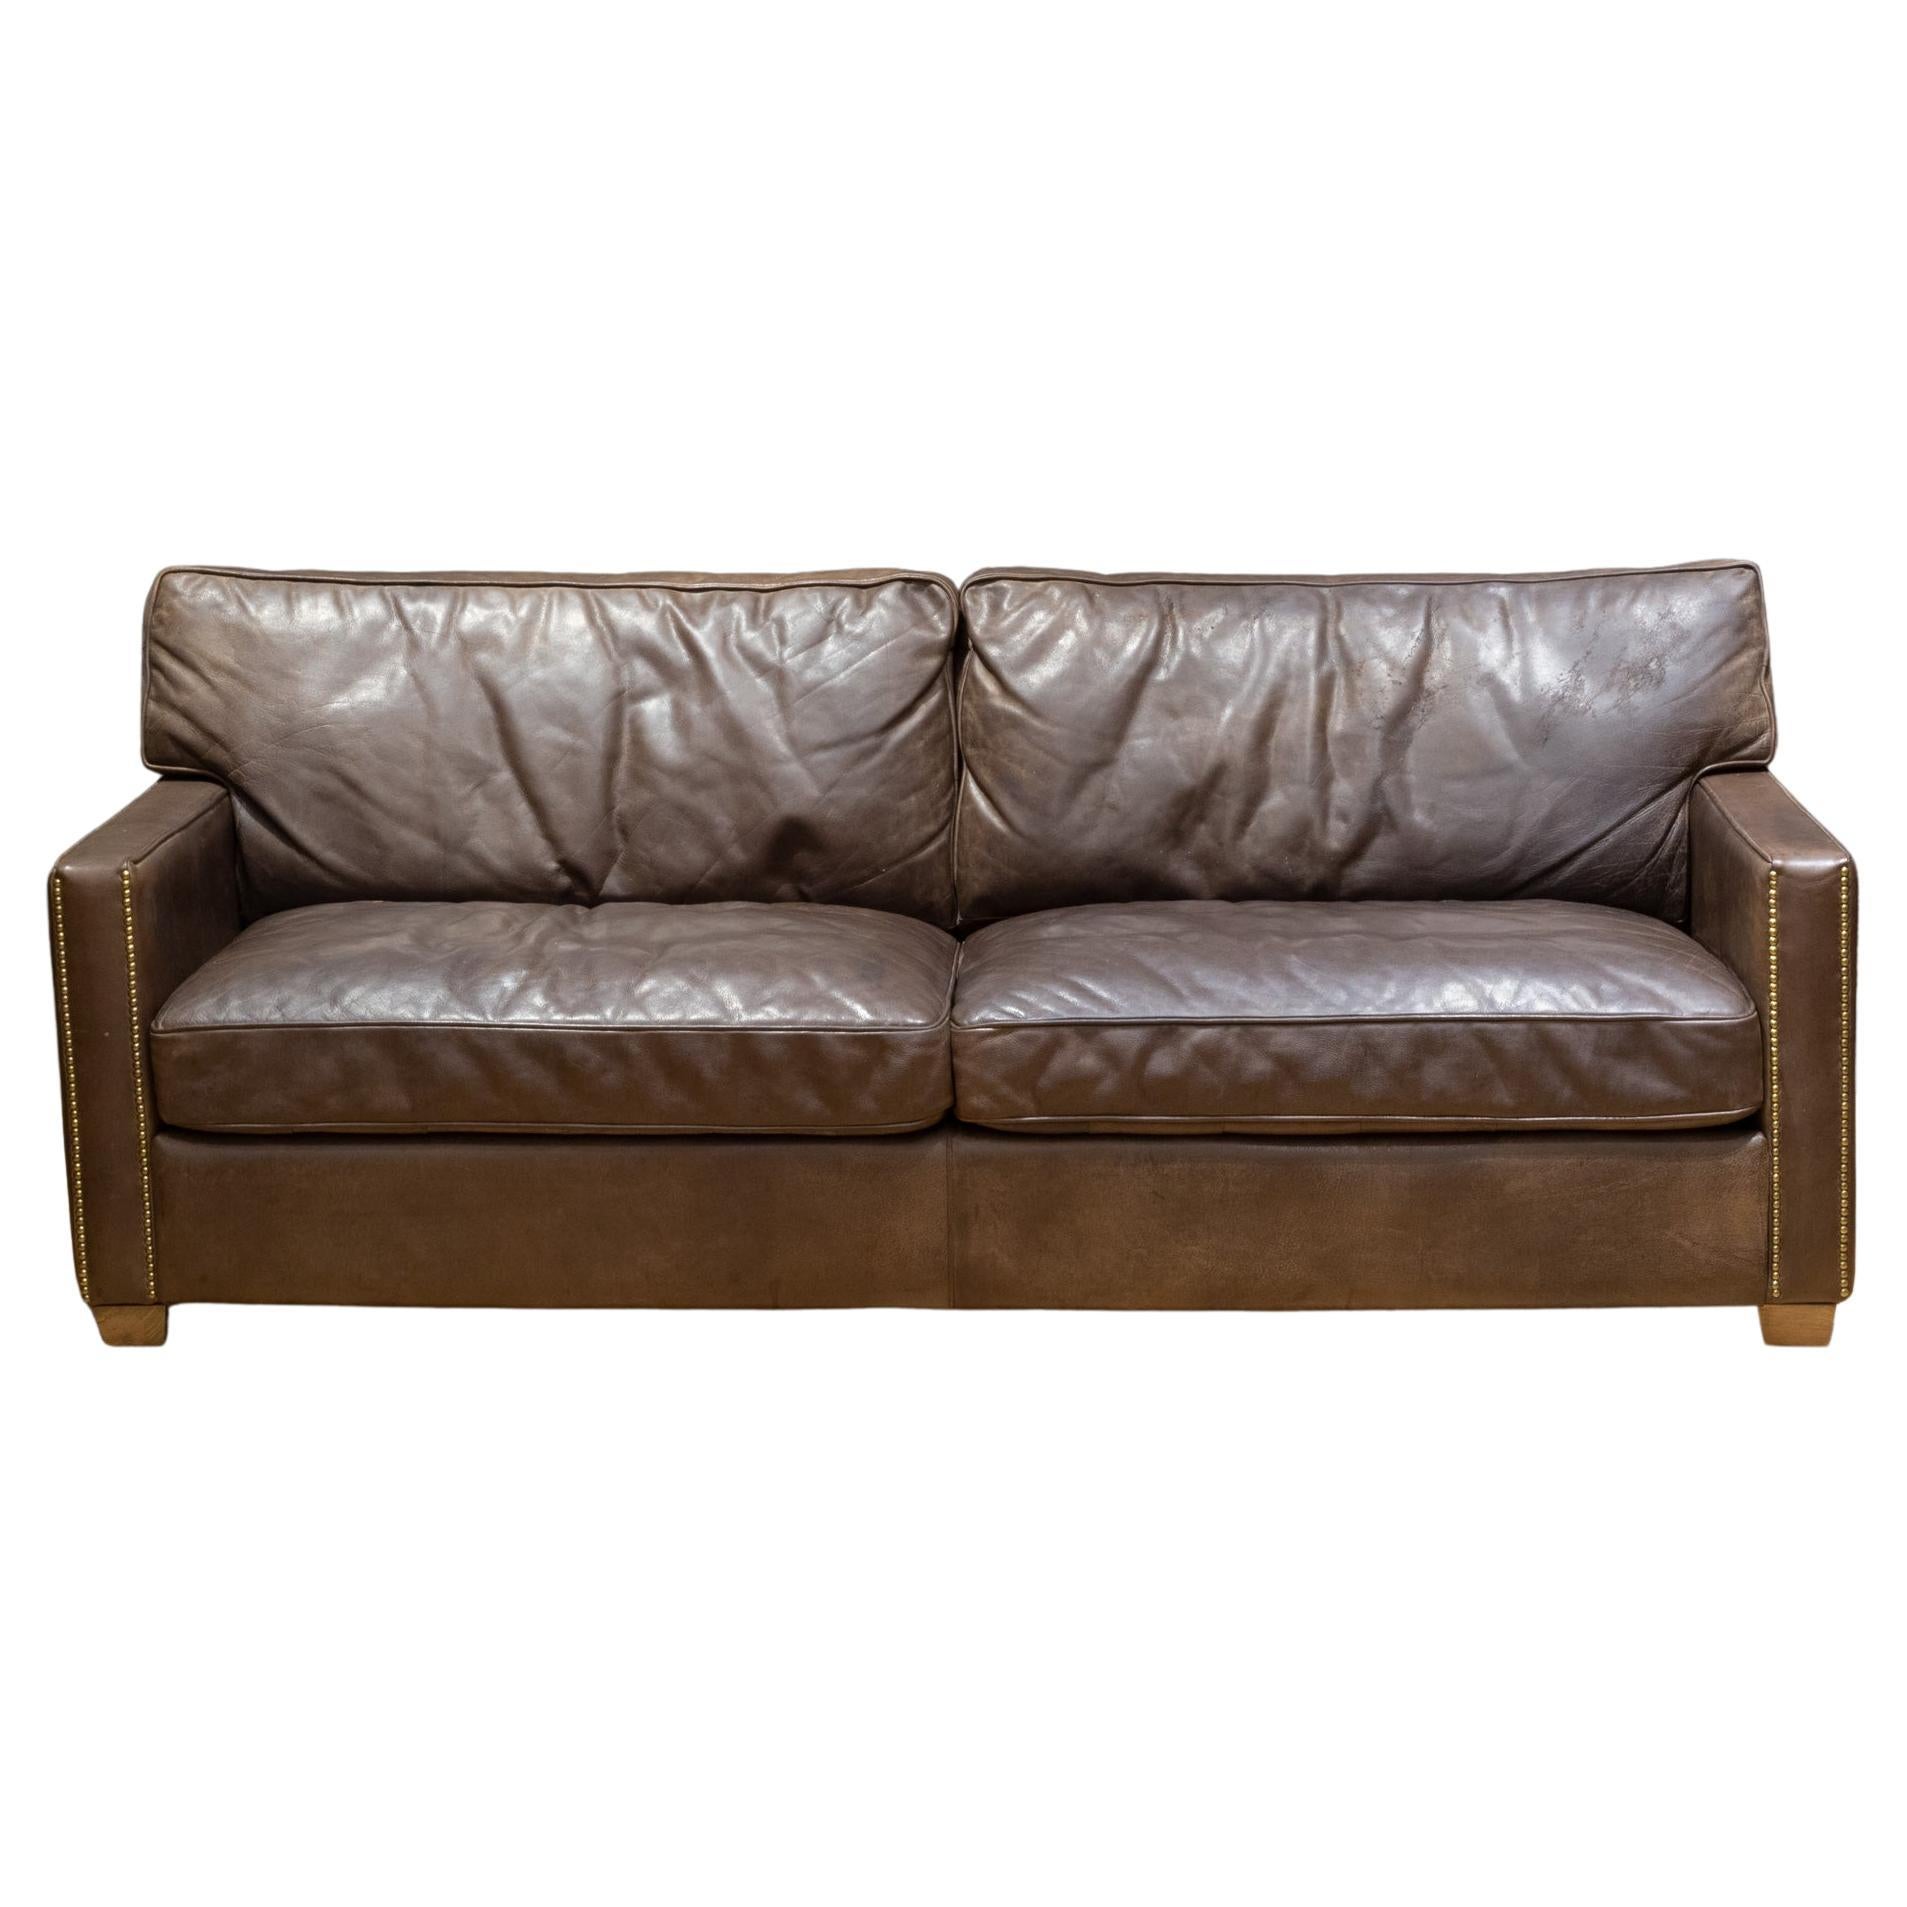 Timothy Oulton Viscount William Leather 3 Seater Sofa For Sale at 1stDibs